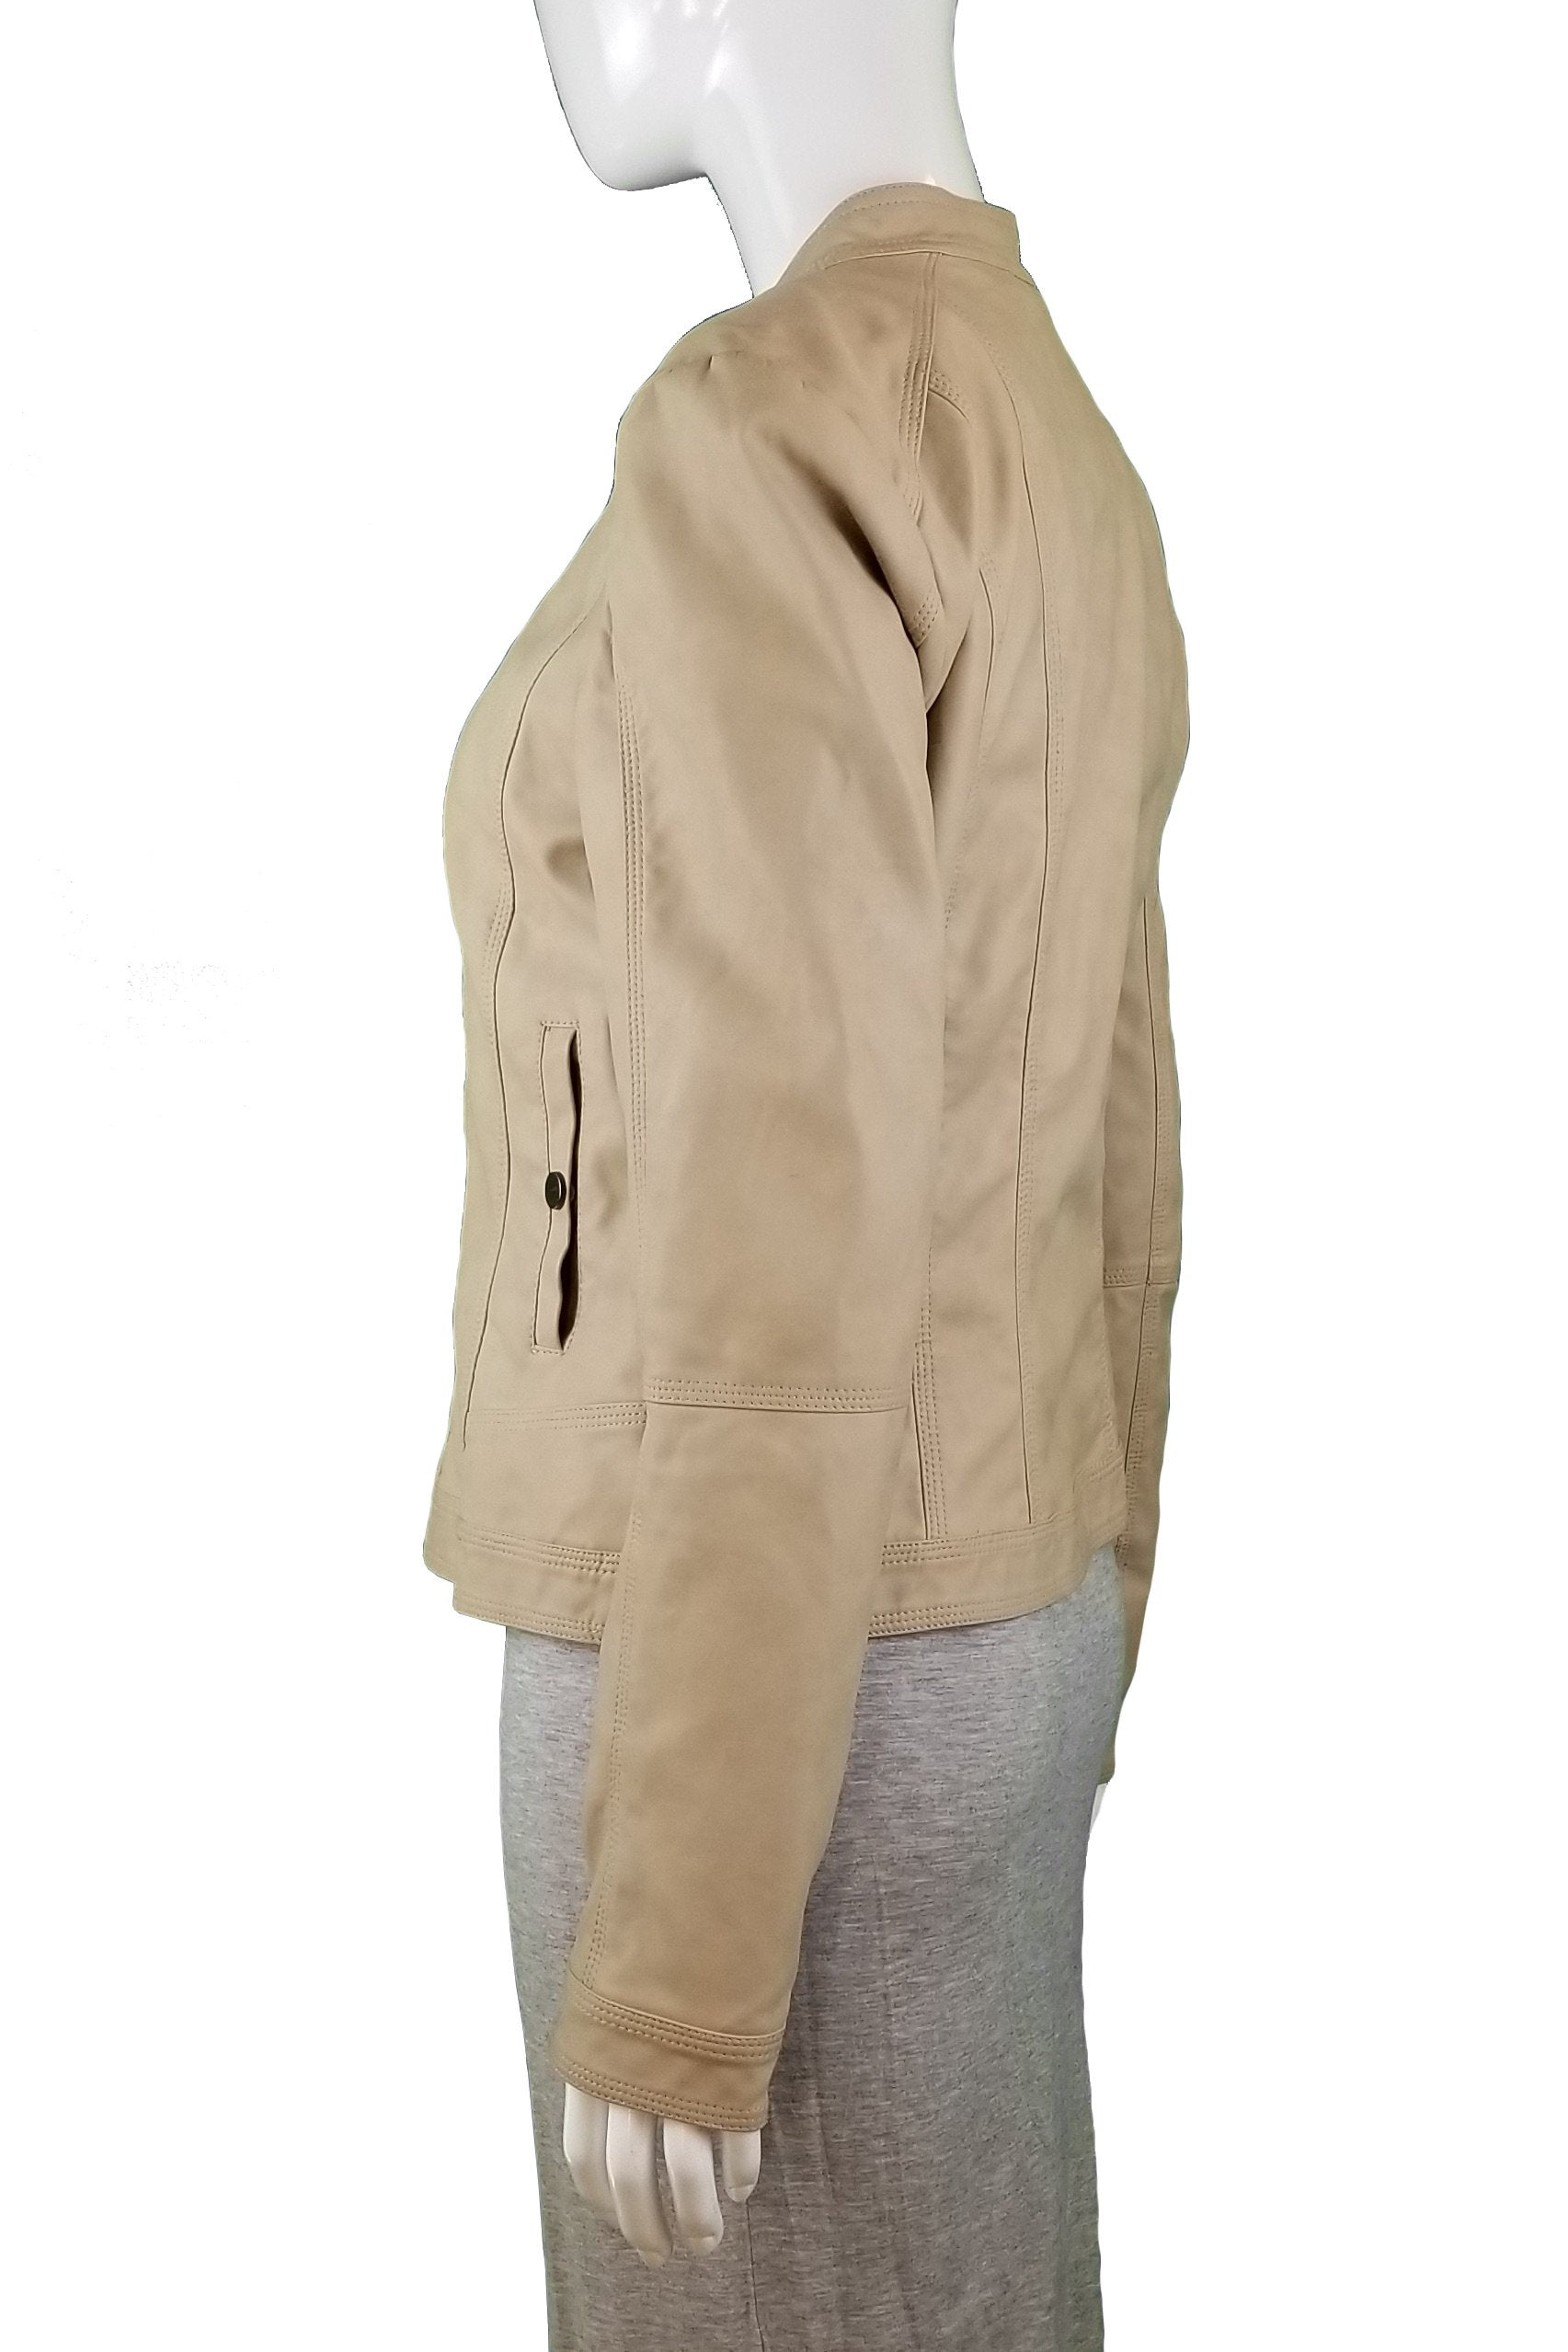 ONLY Faux Leather Jacket, Unique light color leather jacket, soft to the touch, Tan, Brown, Shell: 50% Polyurethane, 50% Viscose. Lining: 100% Polyester, women's Jackets & Coats, women's Tan, Brown Jackets & Coats, ONLY women's Jackets & Coats, women's leather jacket, ONLY women's jacket, women's coat